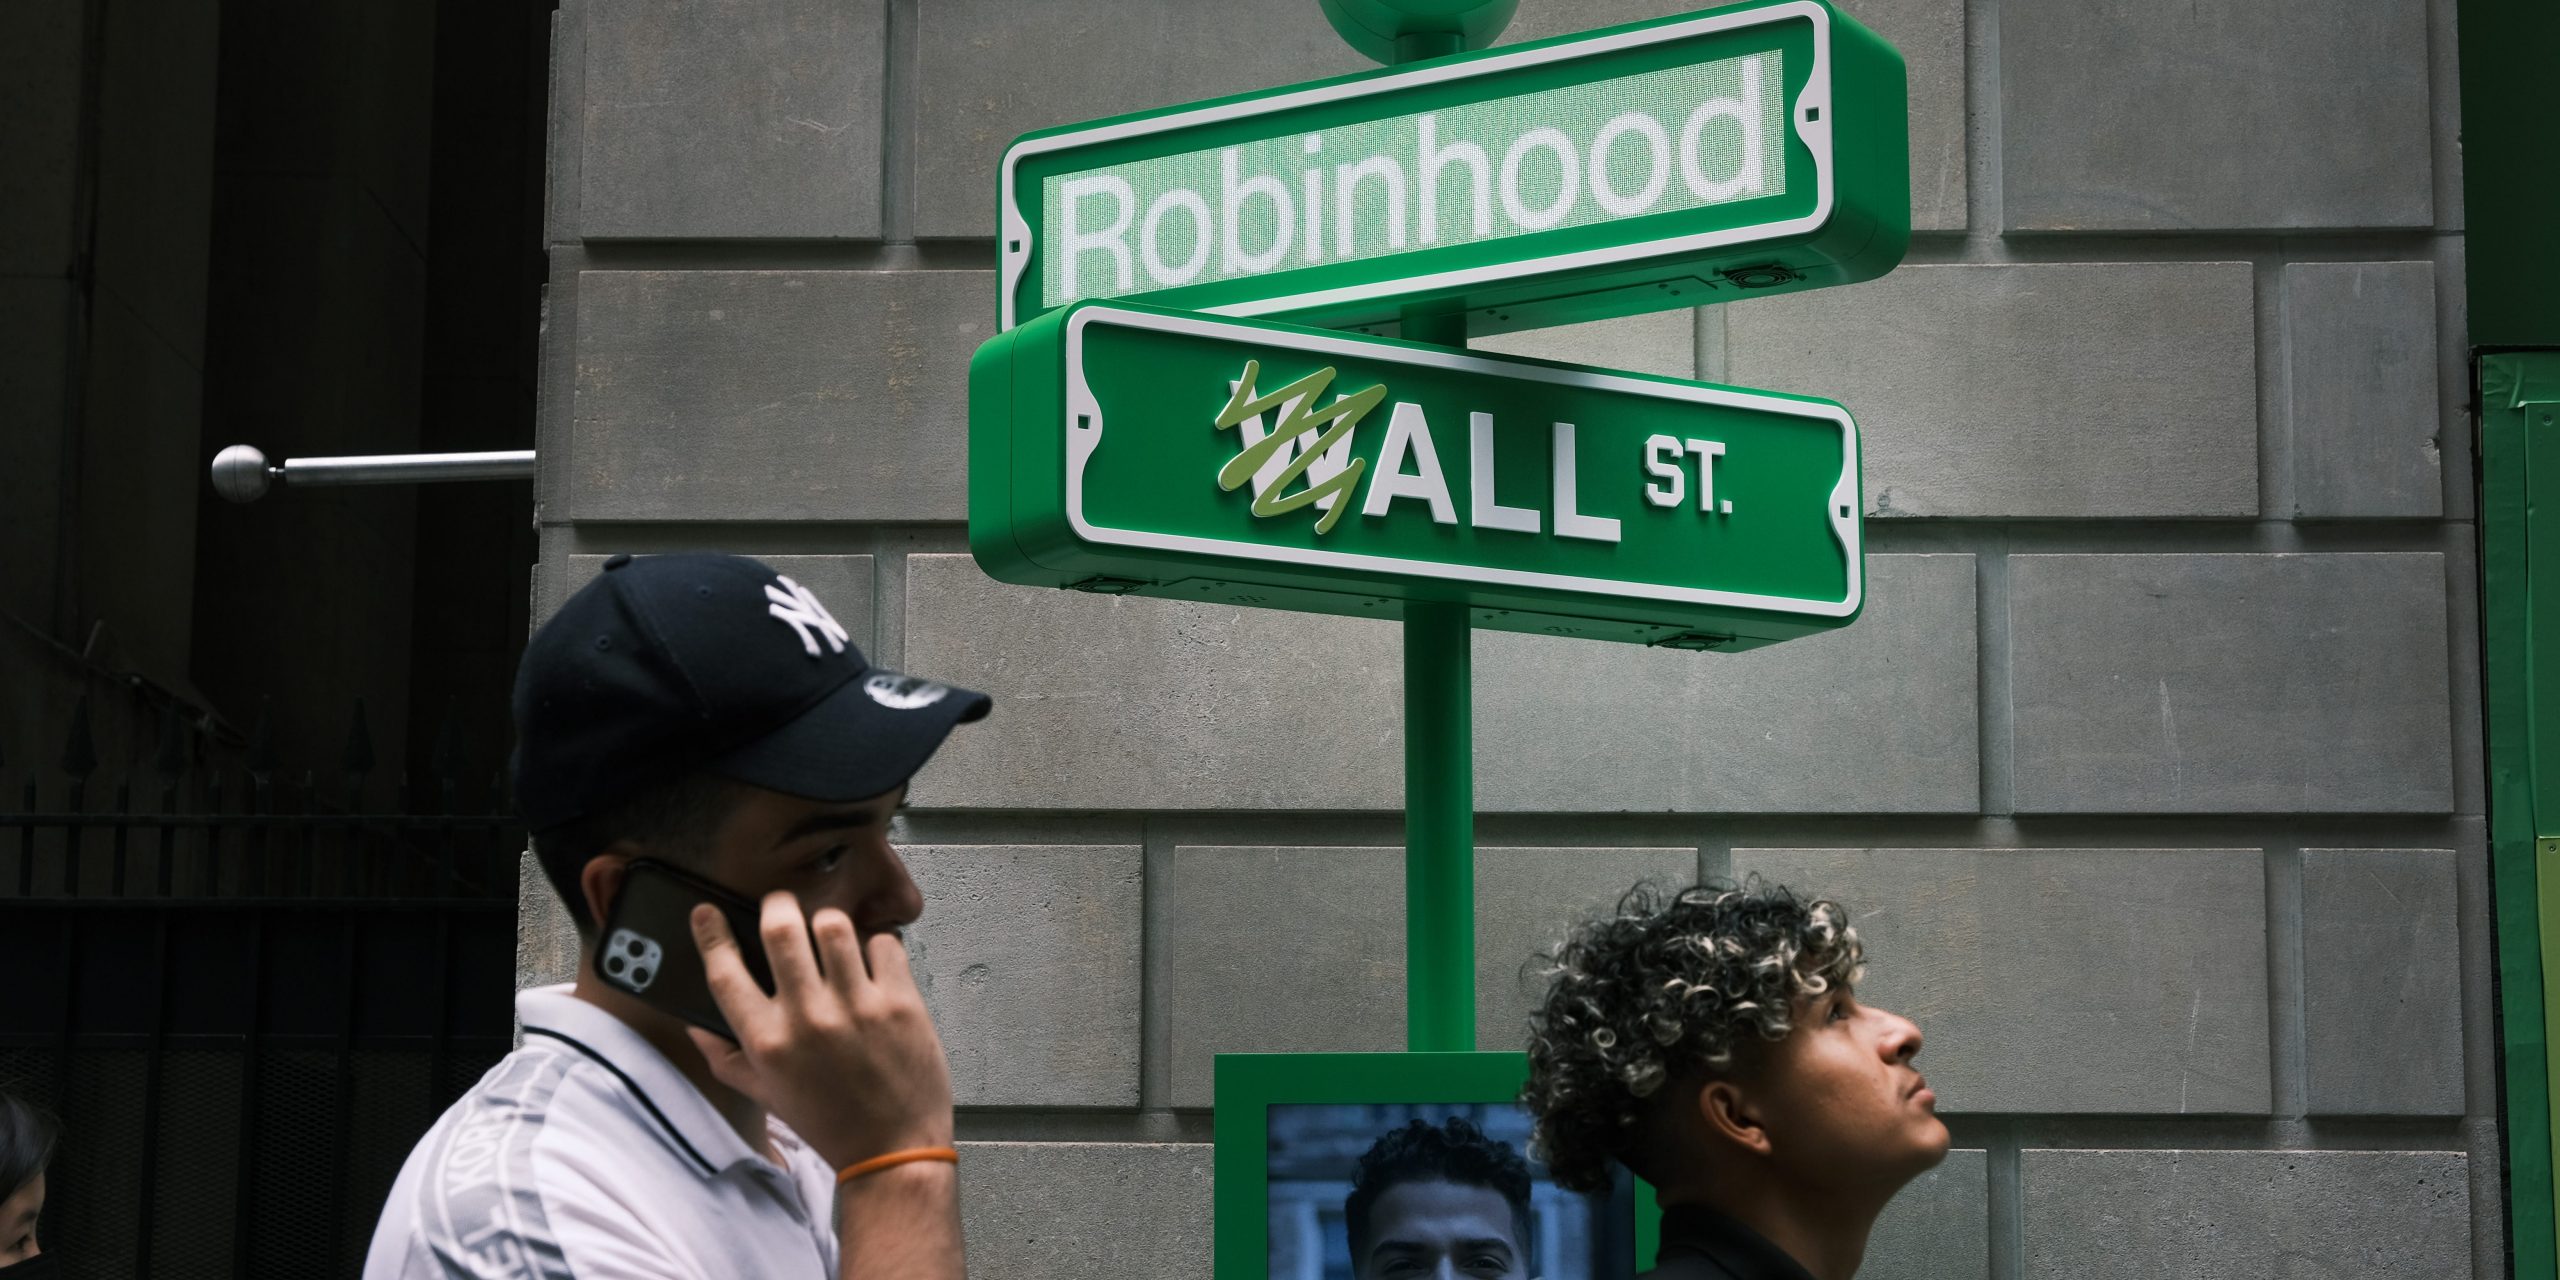 People wait in line for t-shirts at a pop-up kiosk for the online brokerage Robinhood along Wall Street after the company went public with an IPO earlier in the day on July 29, 2021 in New York City.